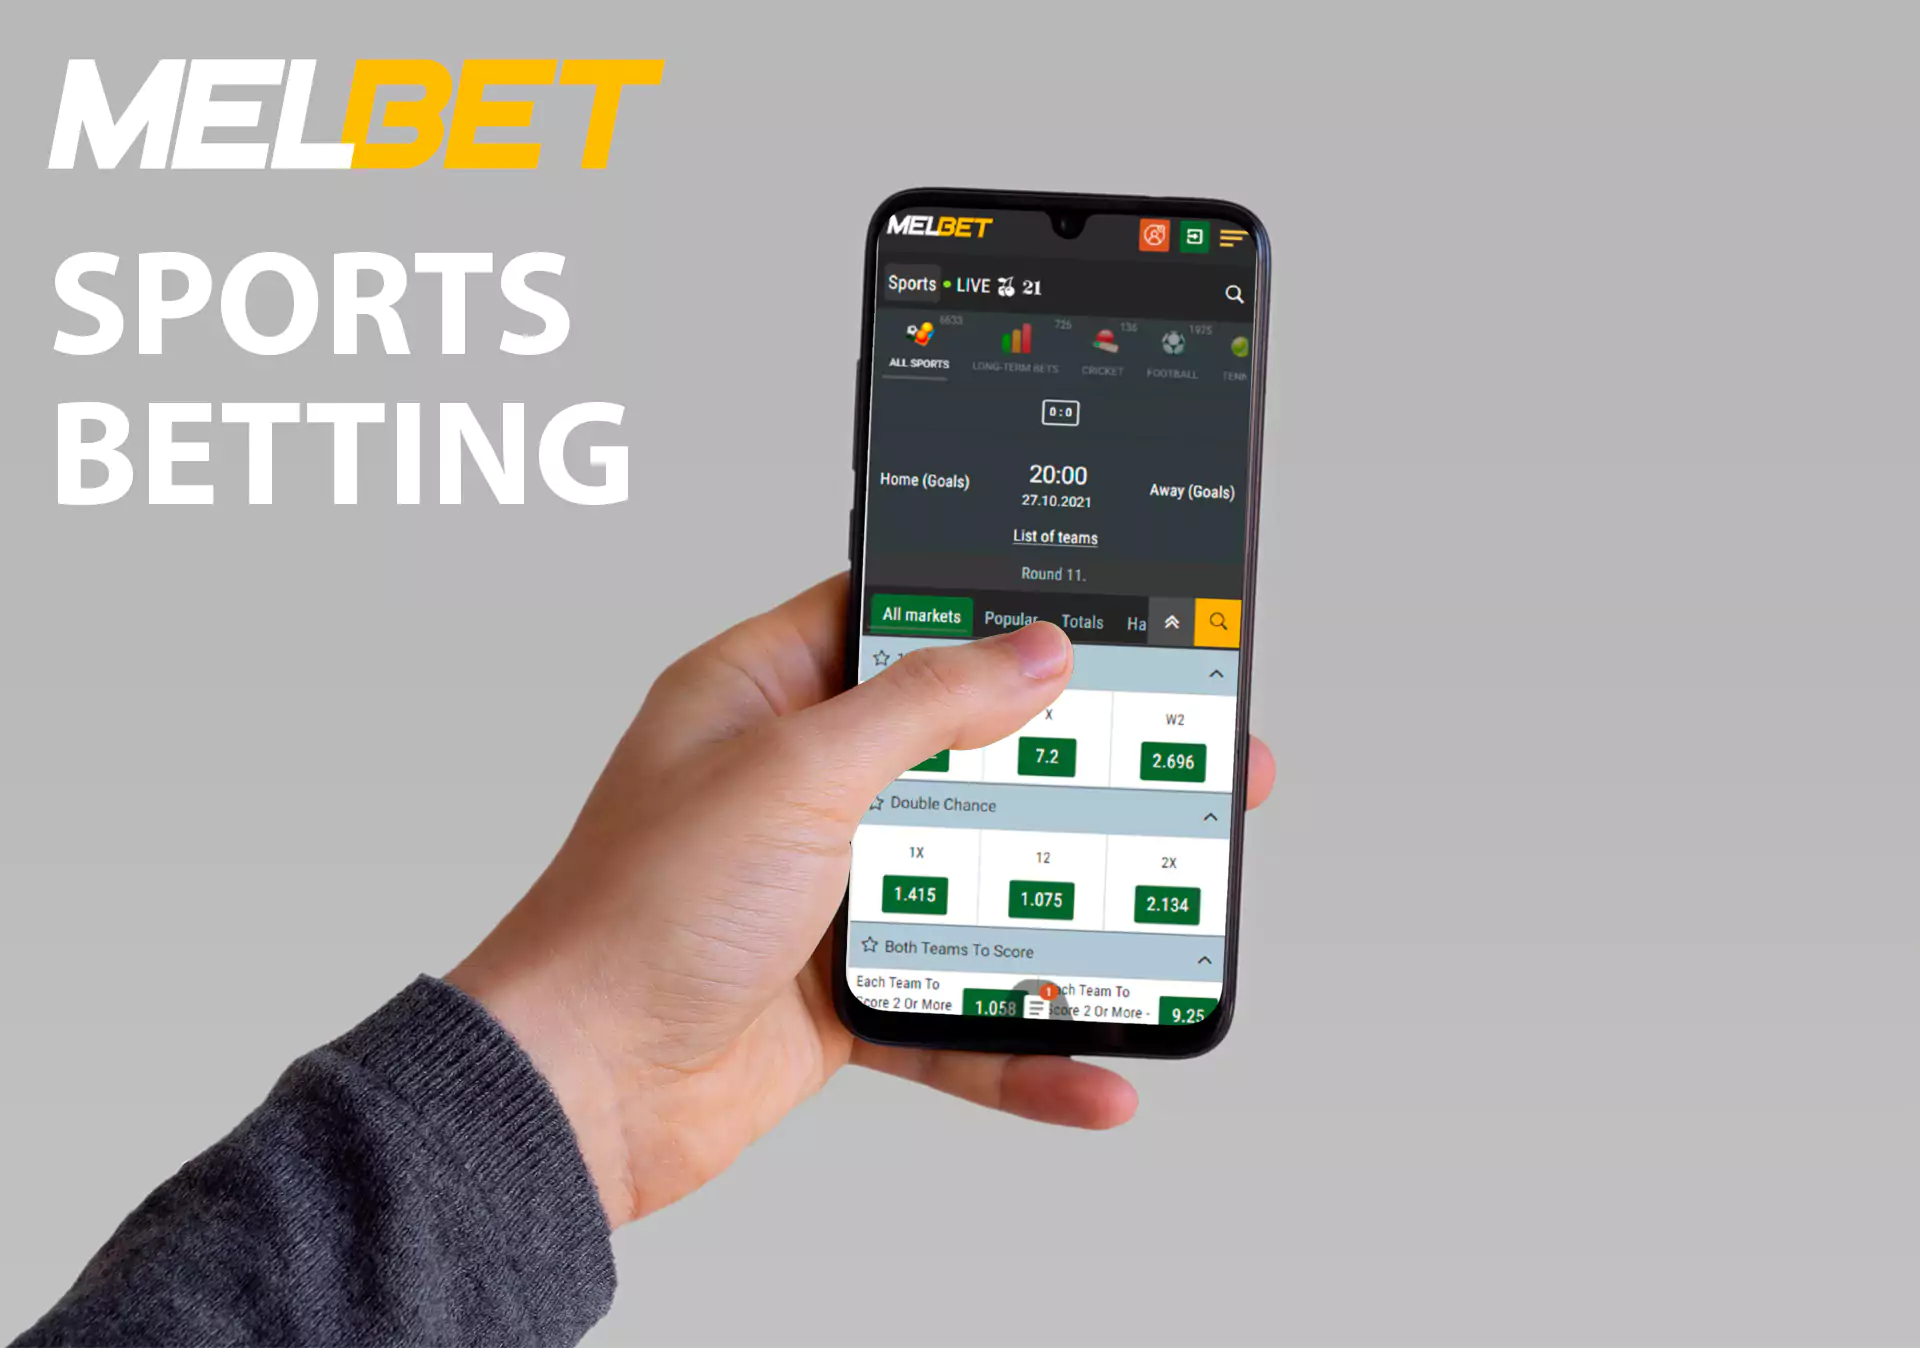 You'll find all the most popular sports disciplines in the Melbet app.